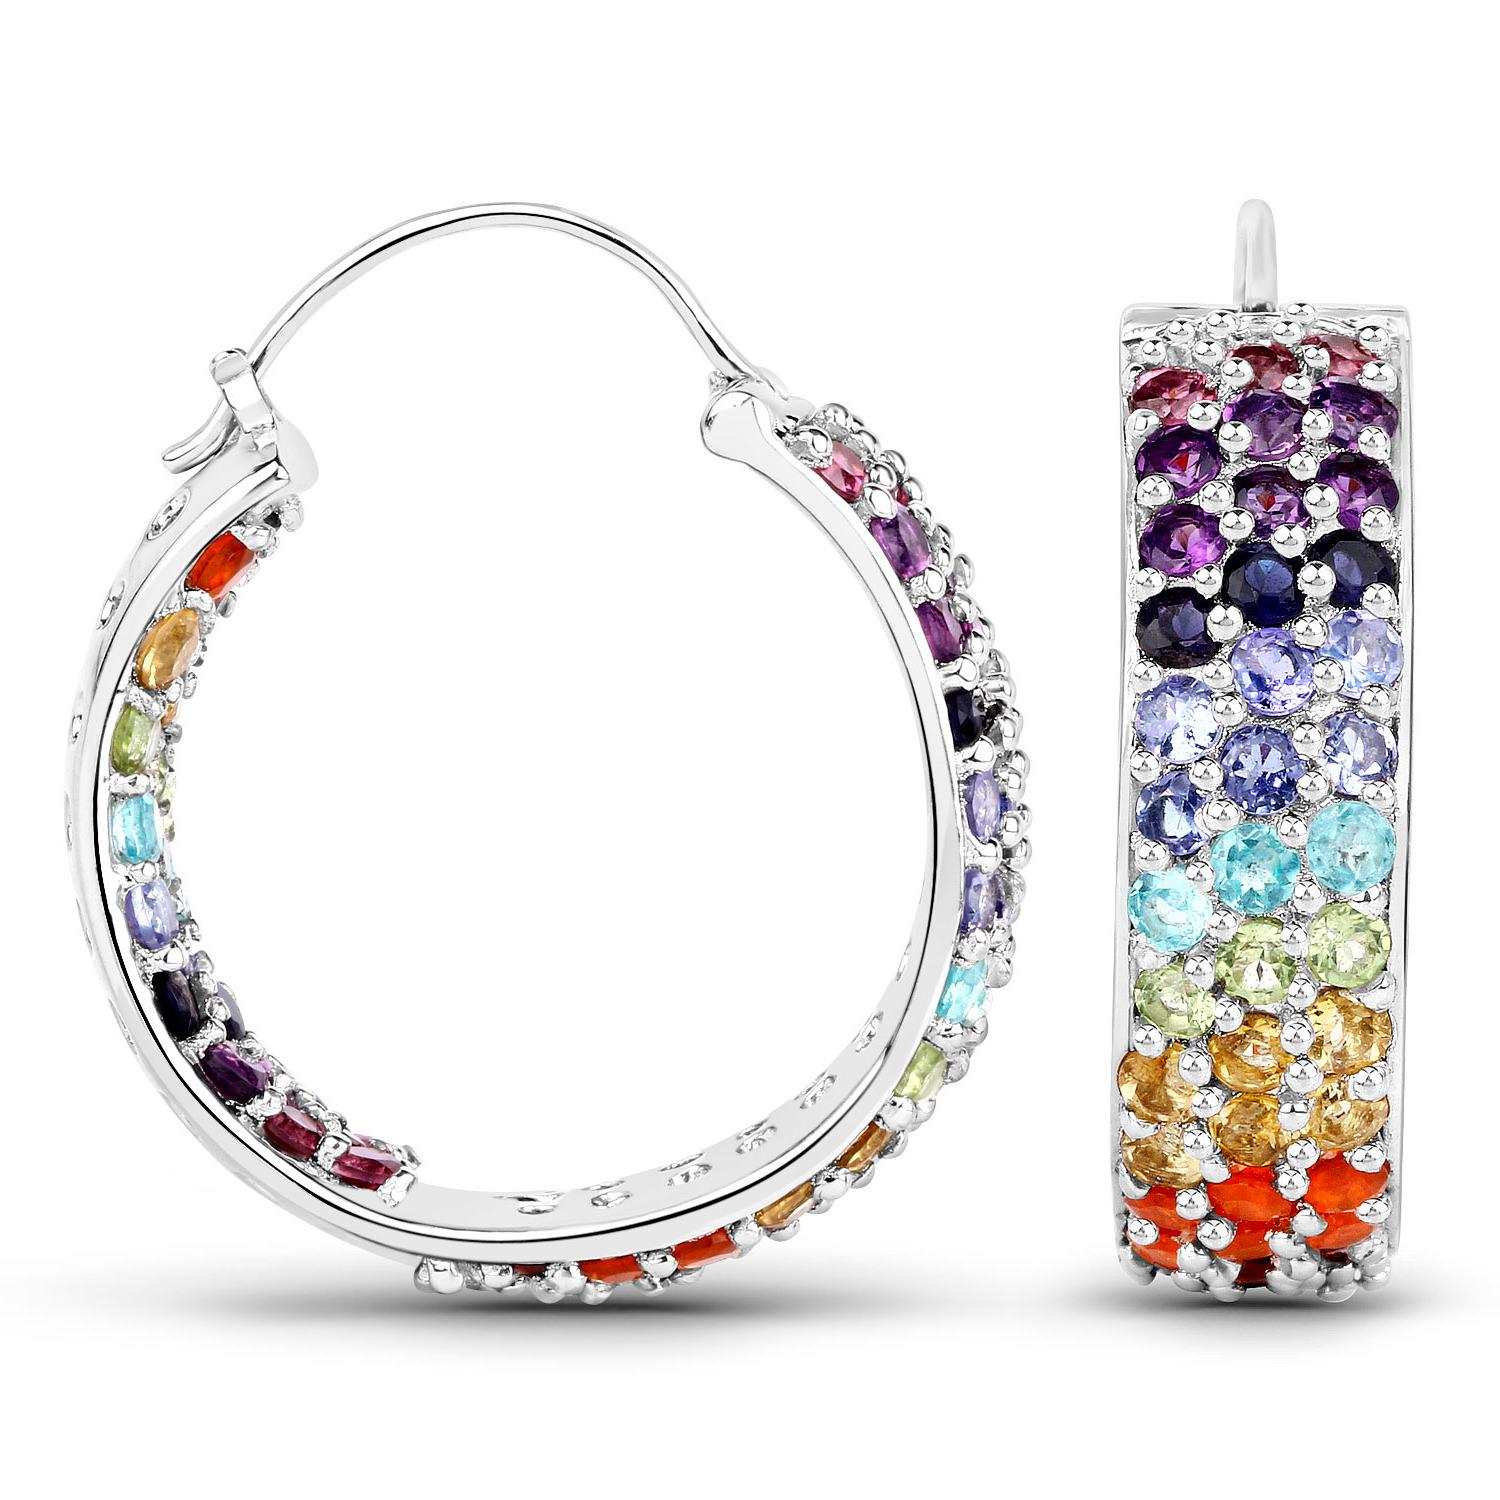 Round Cut Multicolored Gemstones Cluster Earrings 8.8 Carats 18K White Gold Plated Silver For Sale